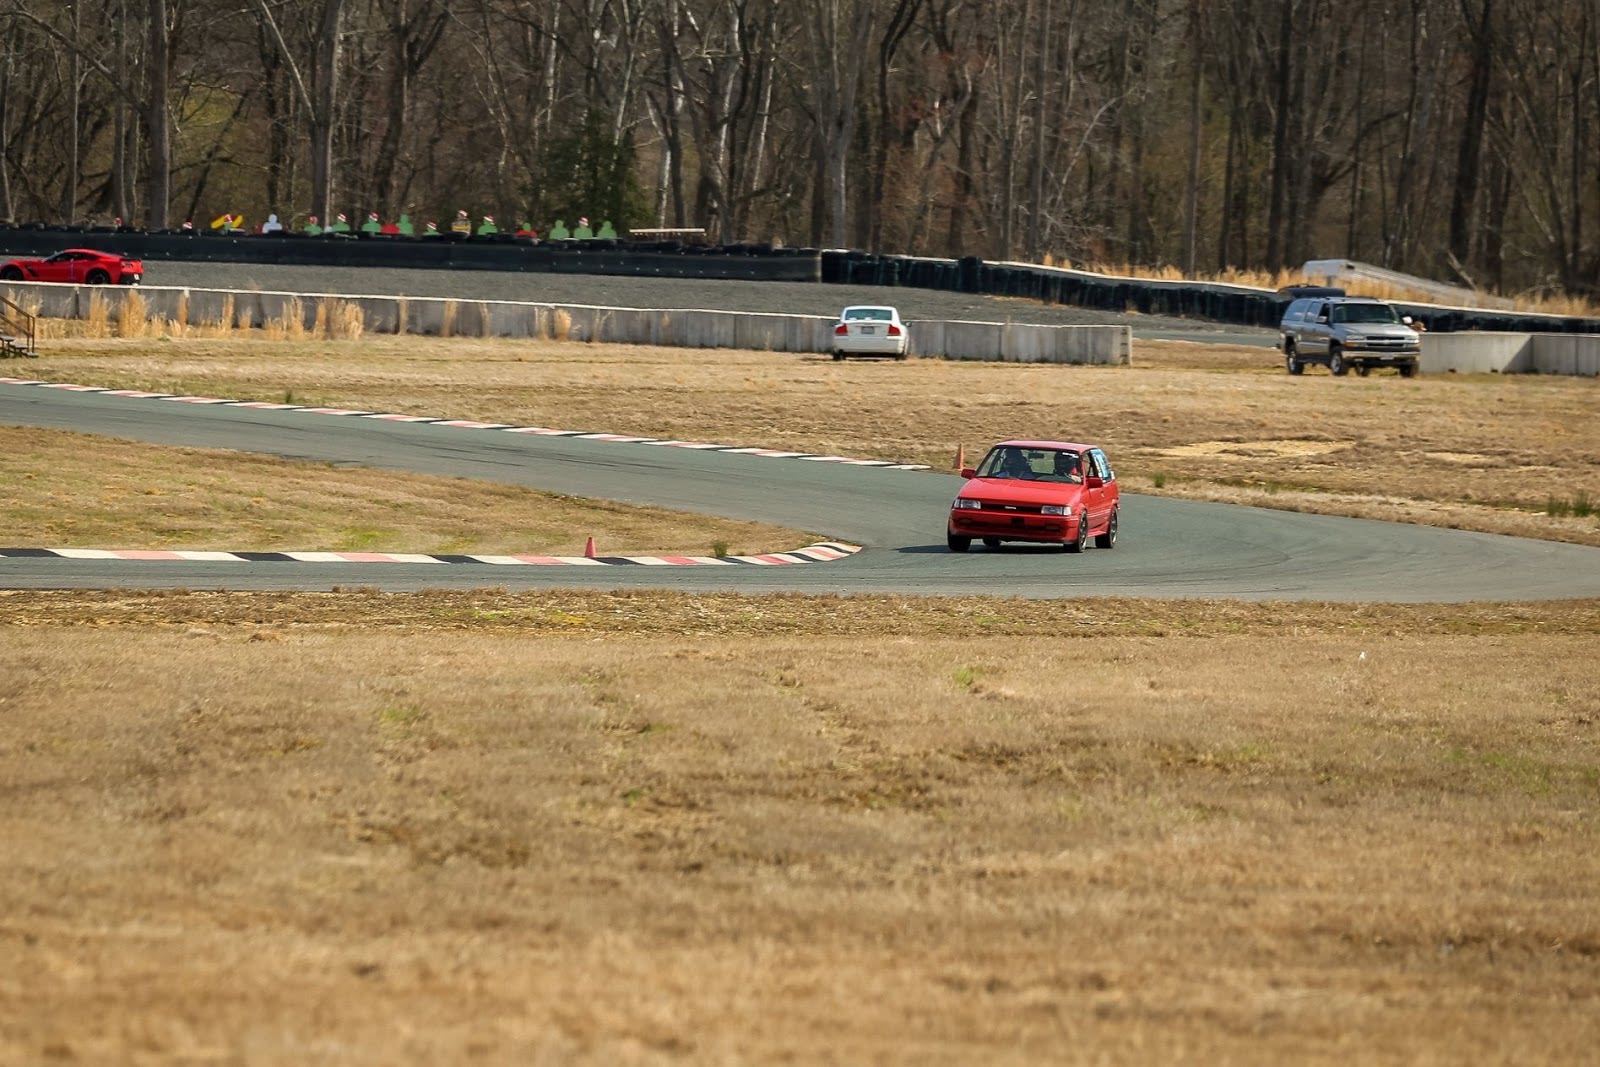 Illustration for article titled Event Recap - HPDE at Dominion Raceway - 4/7/19